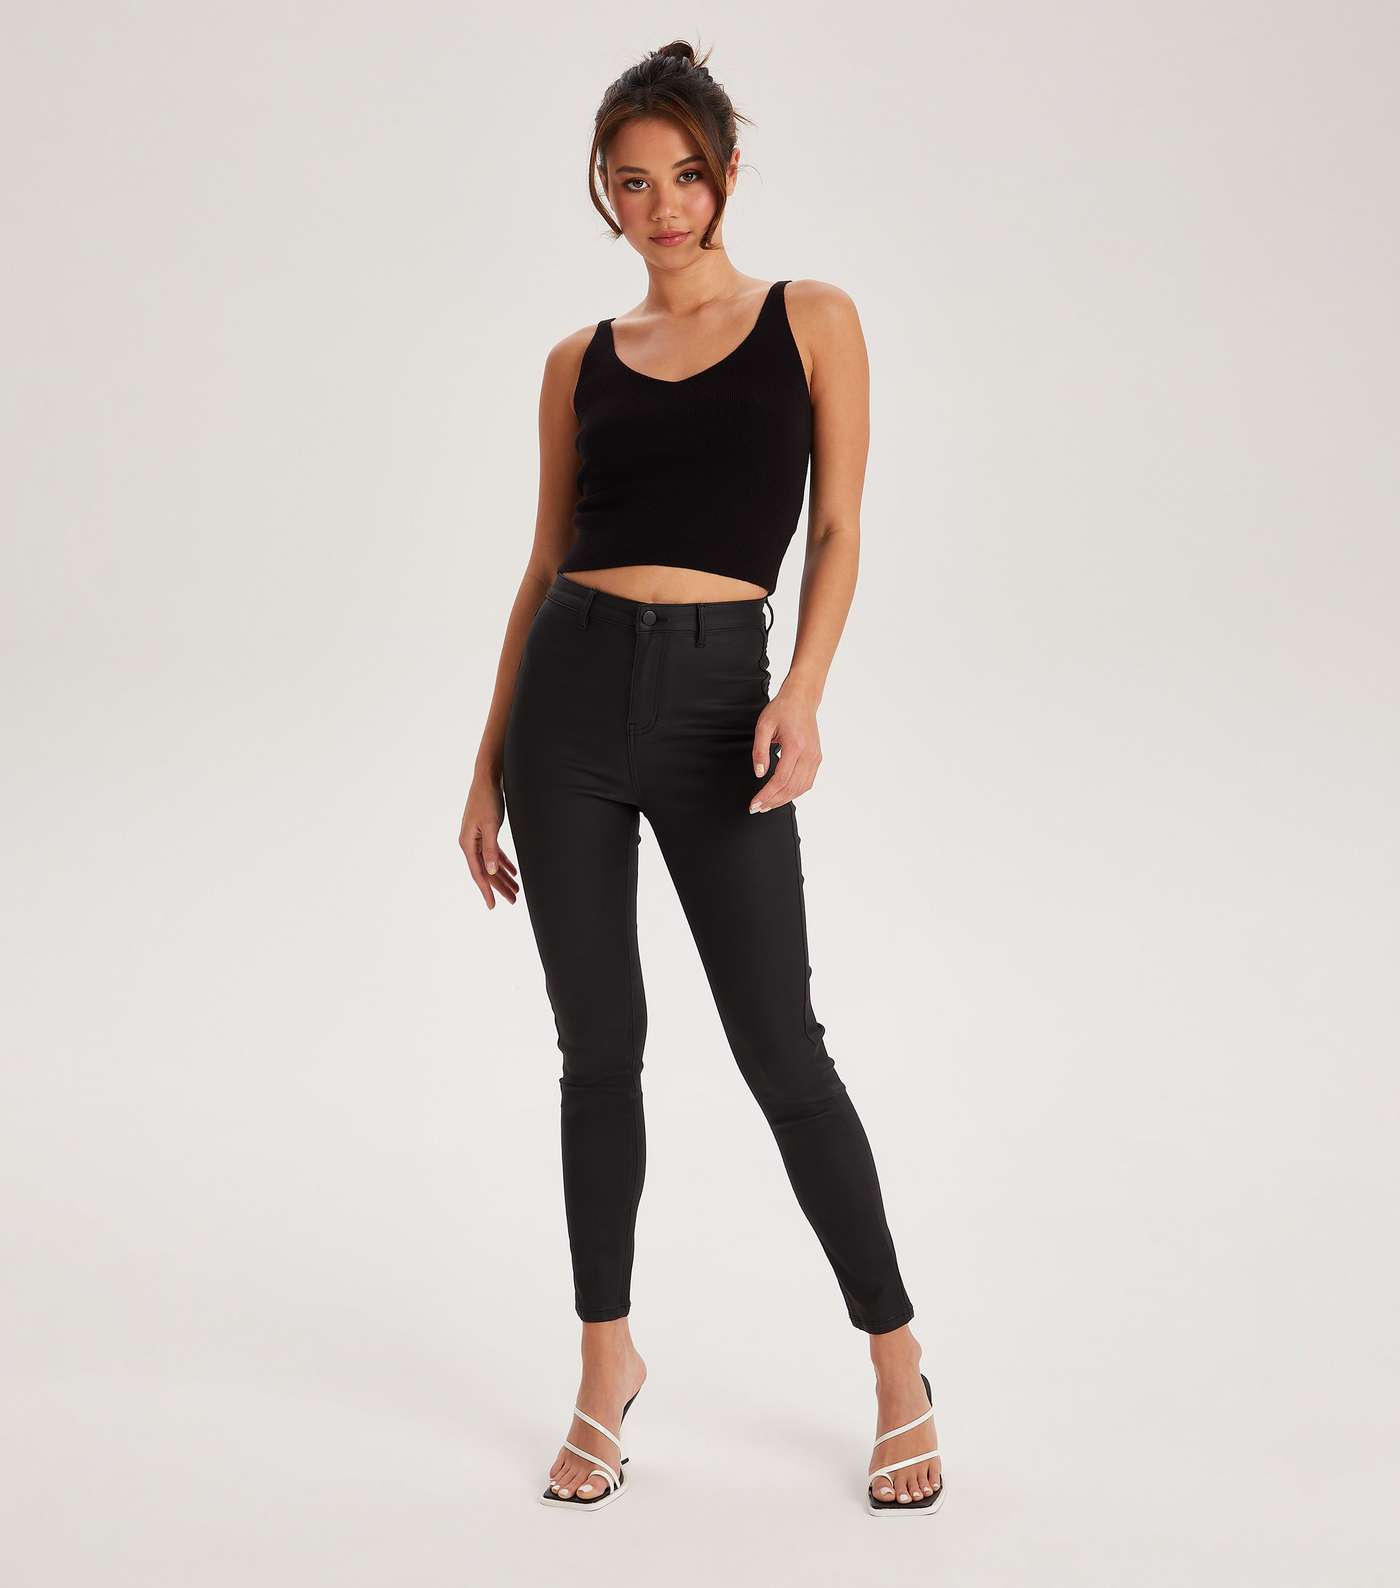 Urban Bliss Black Coated Leather-Look Super Skinny Jeans Image 3